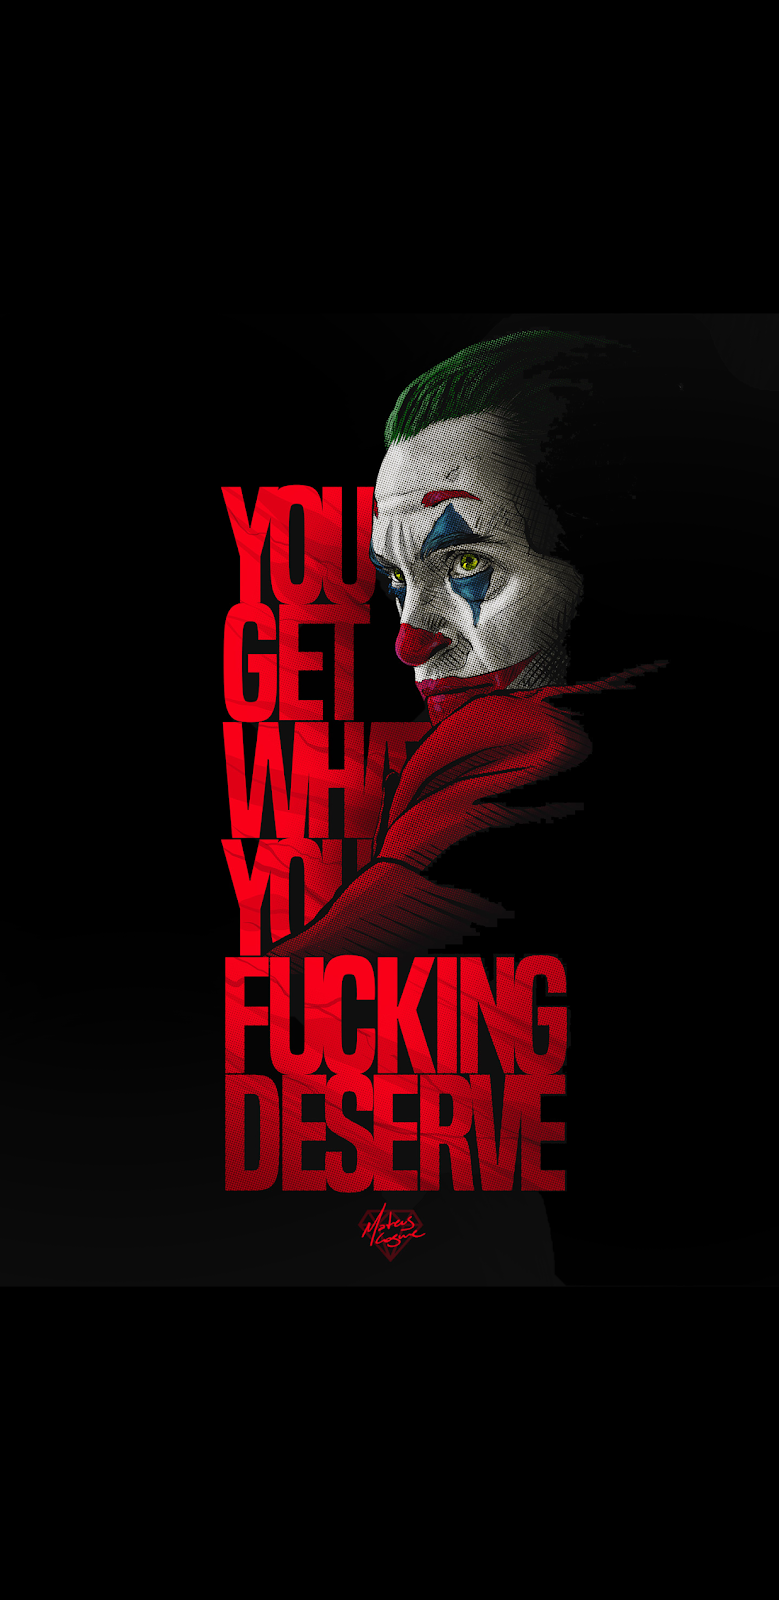 Joker Wallpaper Android | mywallpapers site